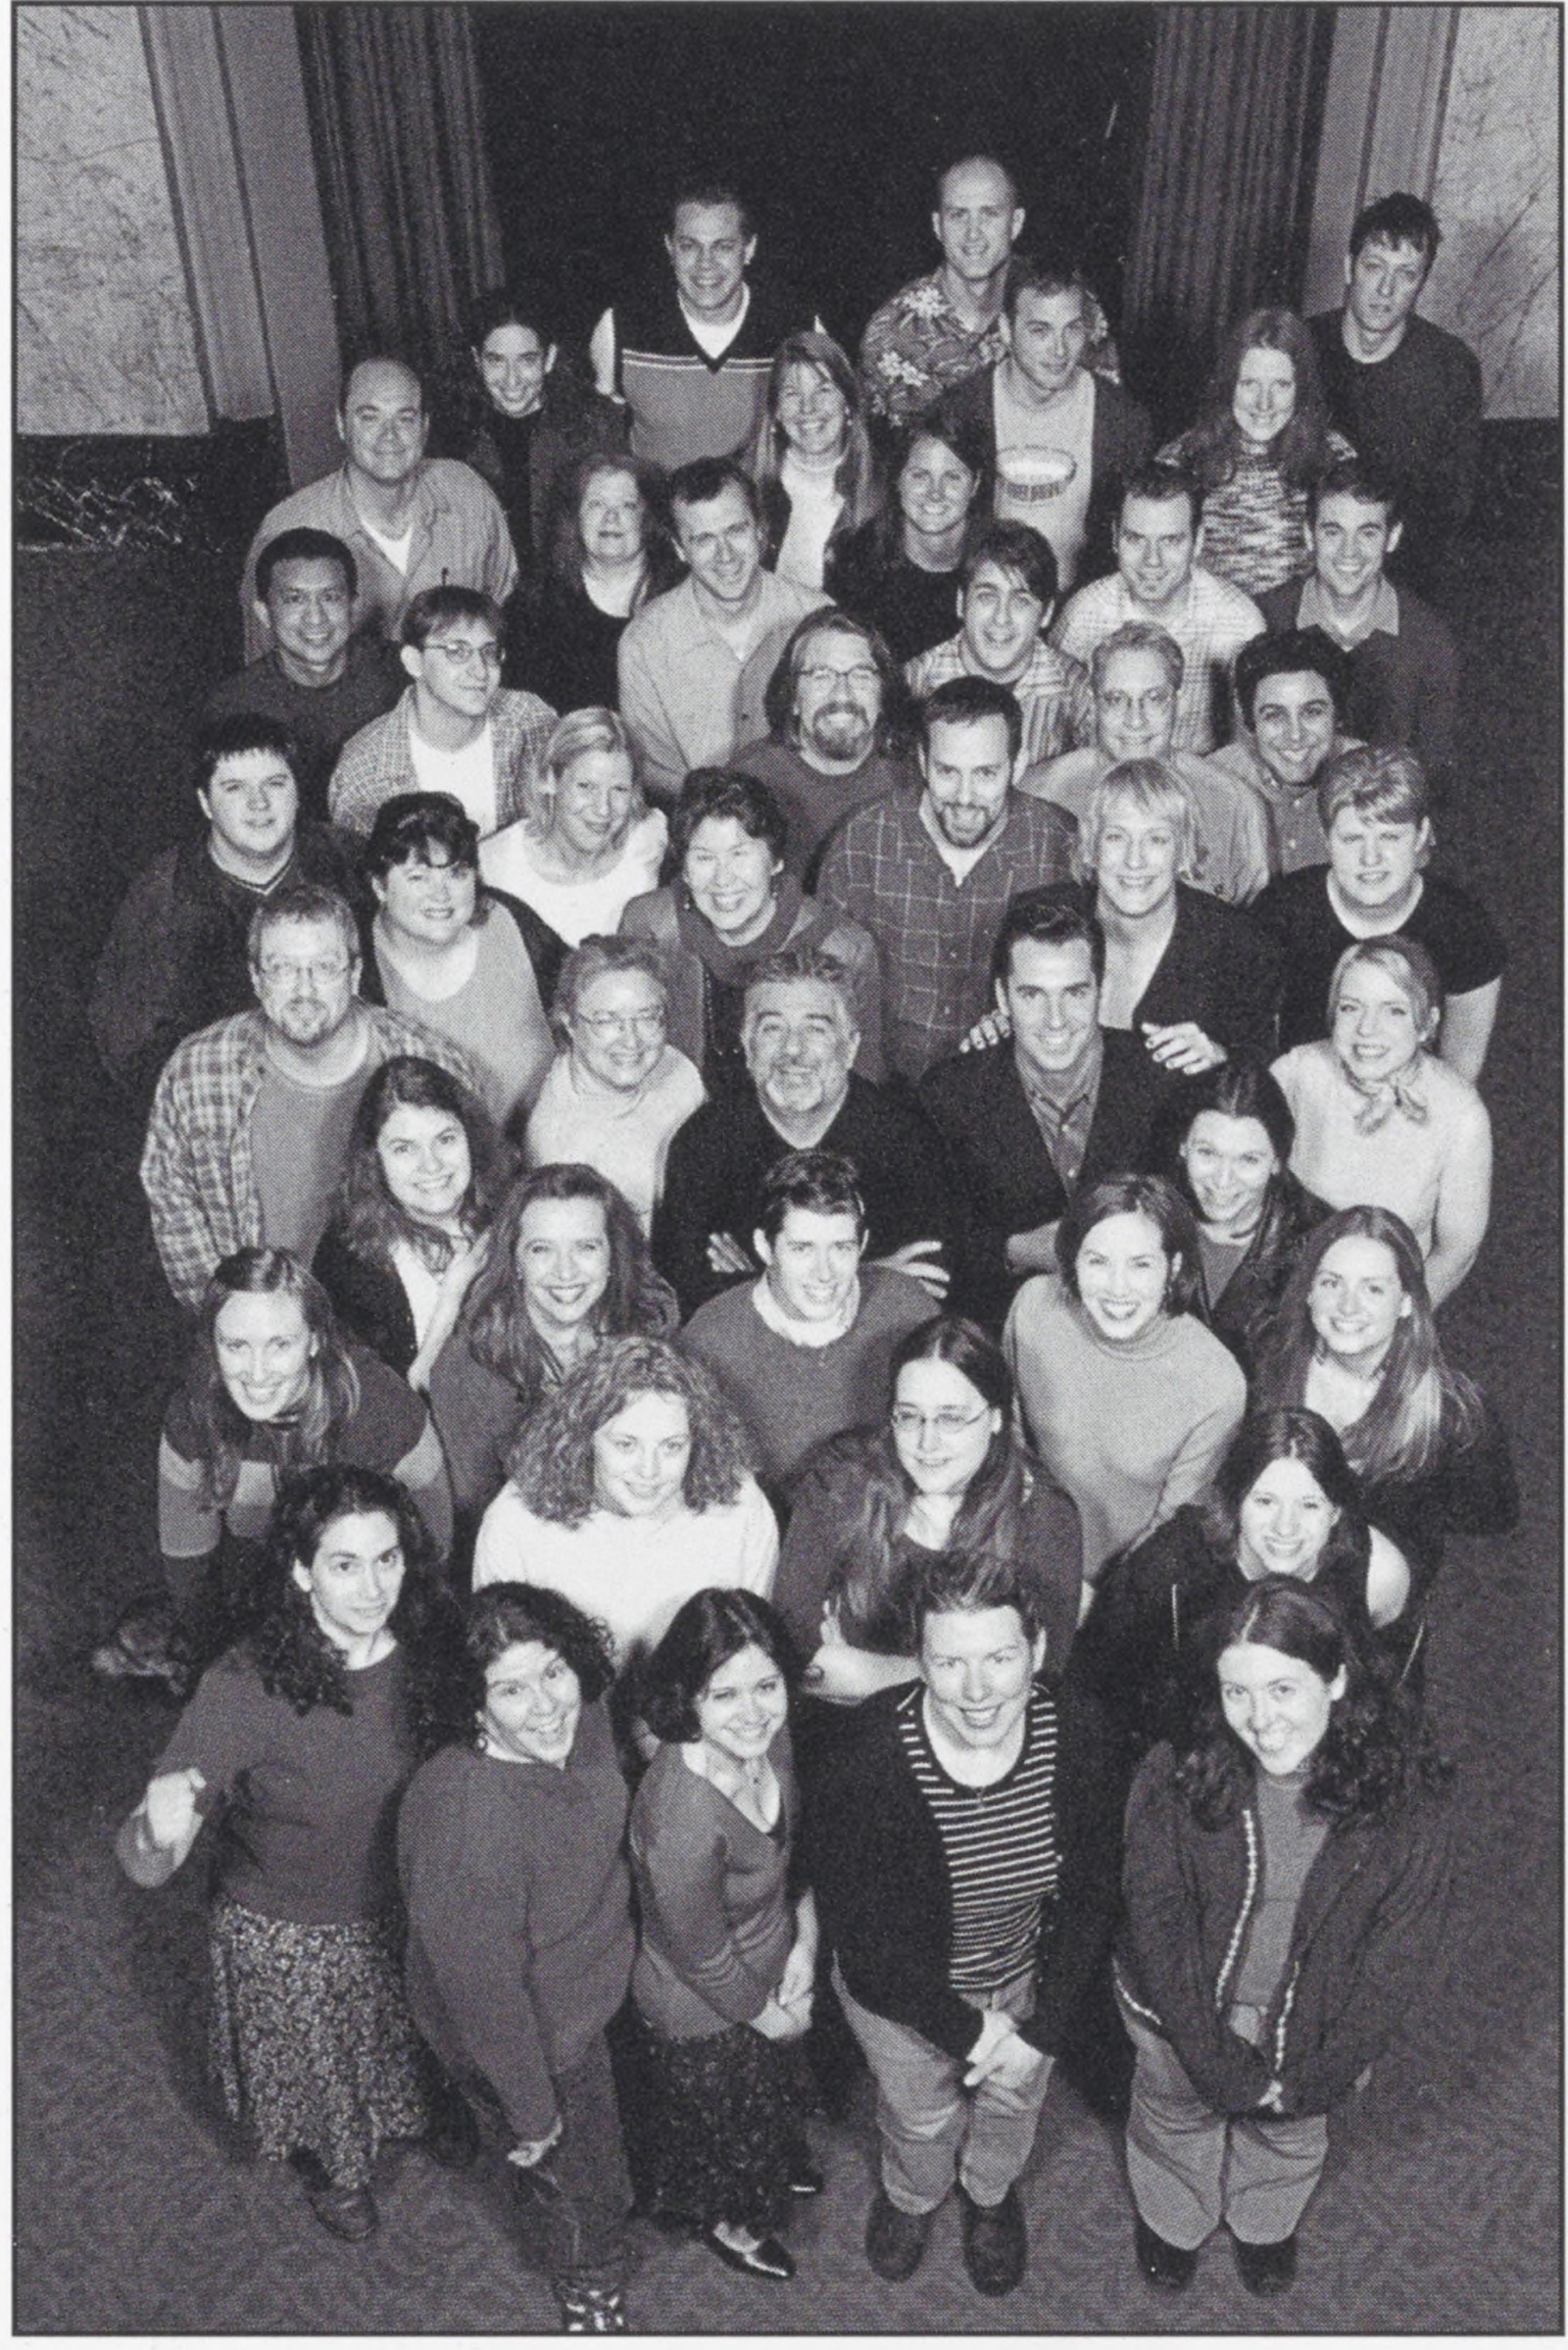 SIFF staff, including long-time programmers, Dan Doody (and a 2001 Print Traffic Manager), Maryna Ajaja, and Ruth Hayler, festival founder, Darryl Macdonald, and Associate Director, Carl Spence